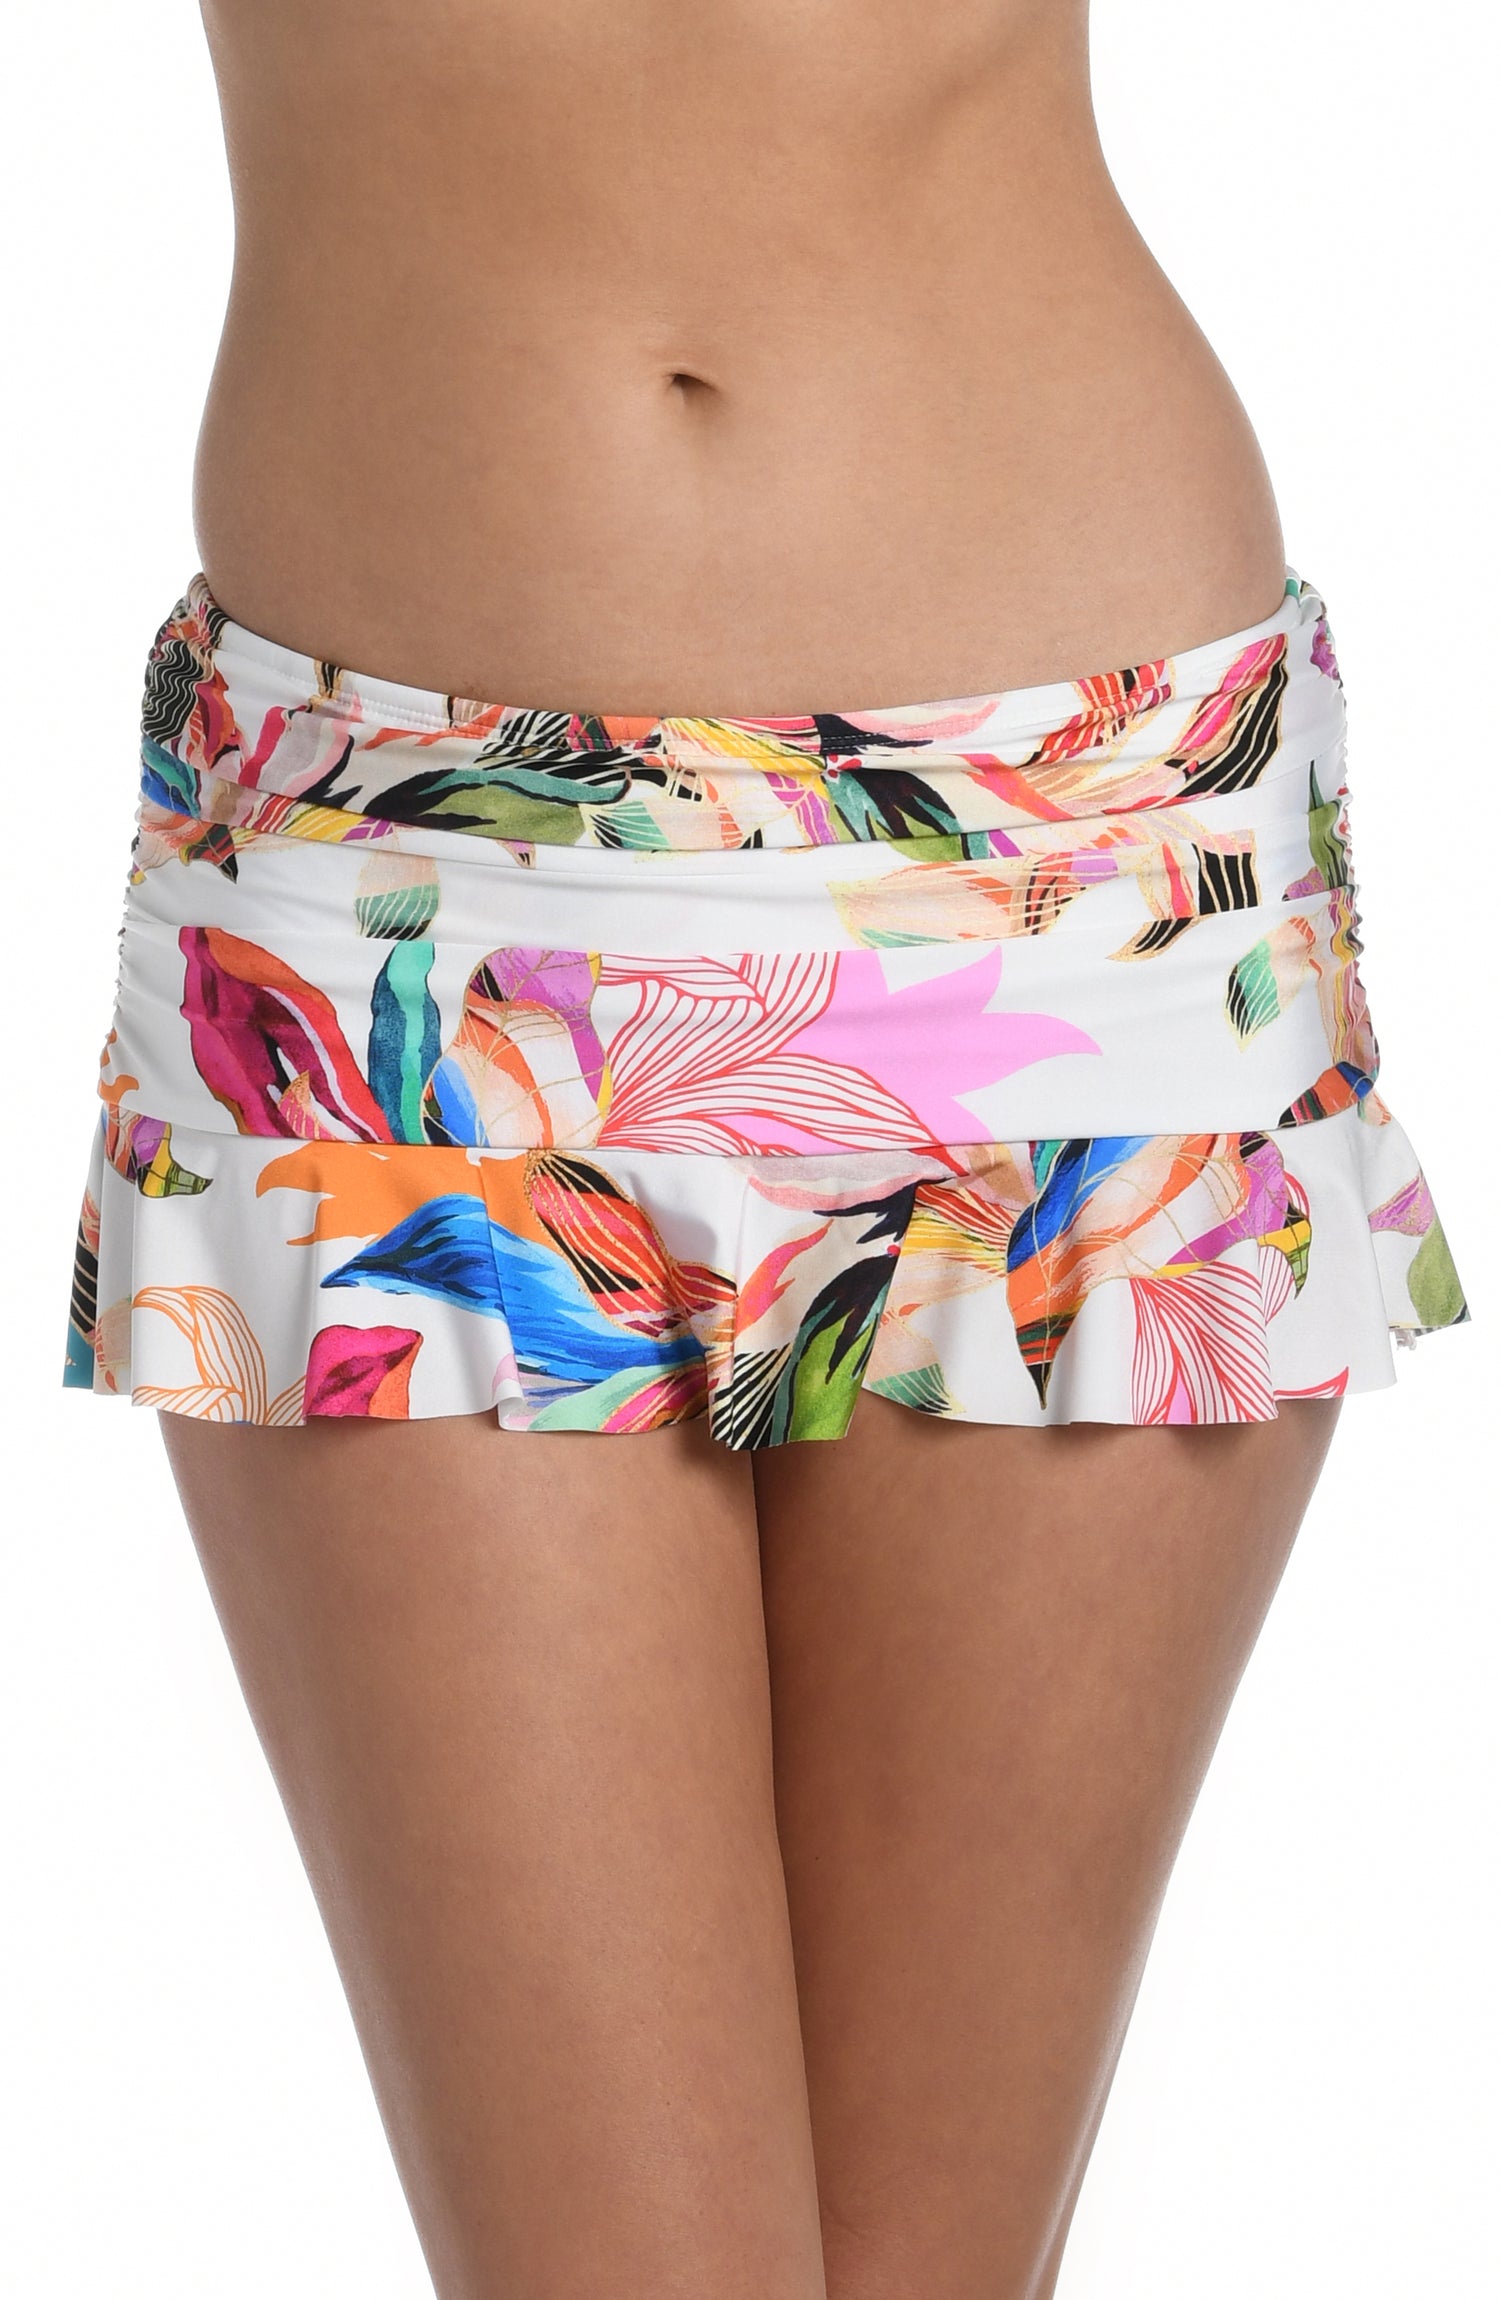 Model is wearing a multi colored tropical printed ruffle skirted bottom from our Paradise City collection!